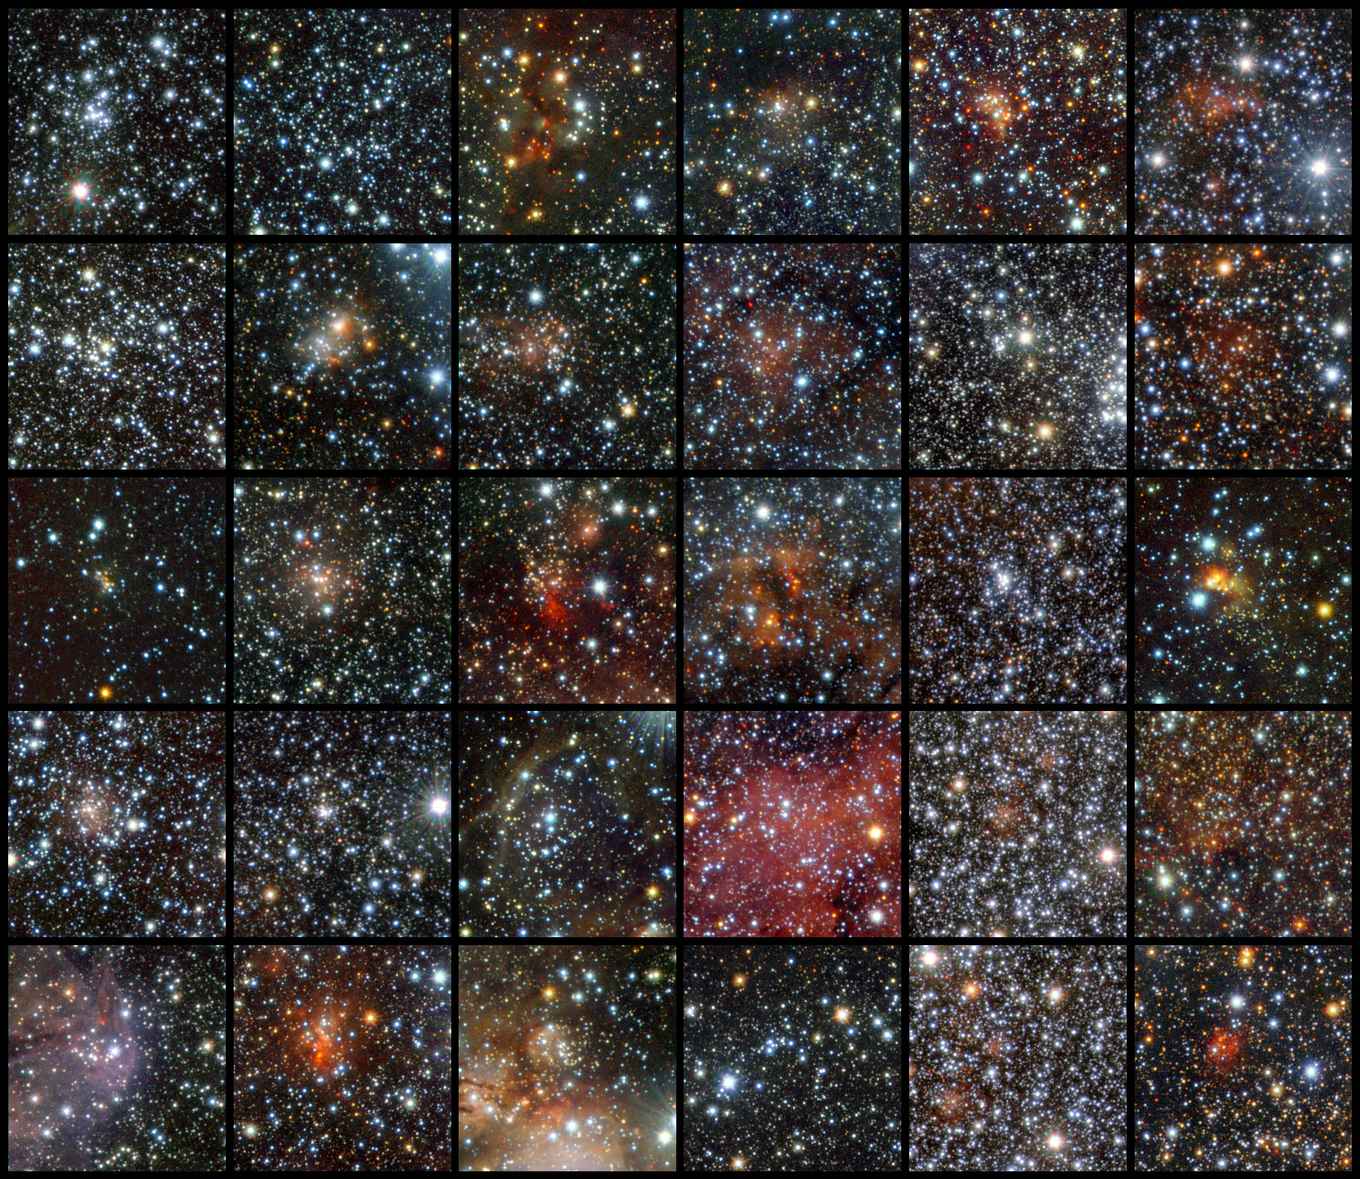 A diverse collection of star clusters